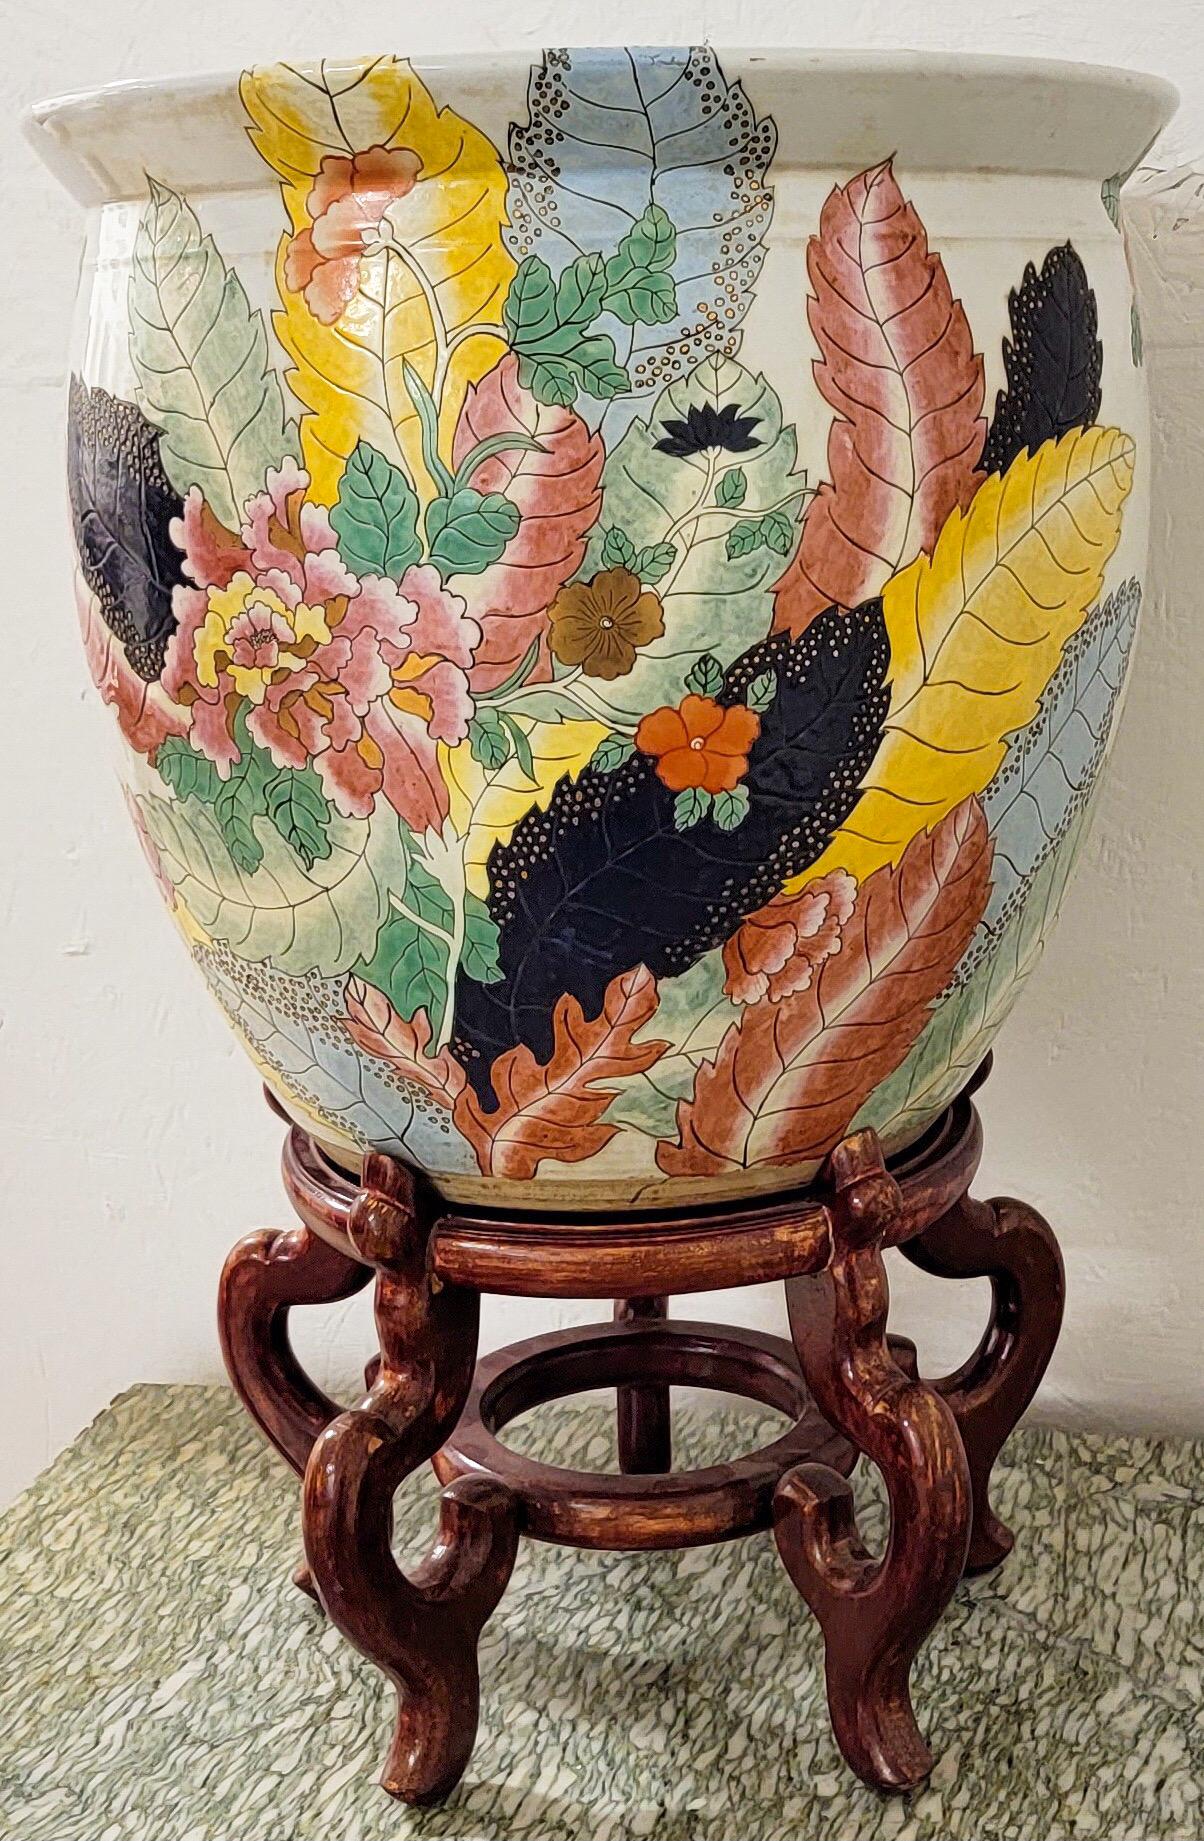 I love this! It is a large scale Asian planter with a vibrant tobacco leaf pattern. It is in very good condition. The planter height is 16”. The stand adds another 10”.